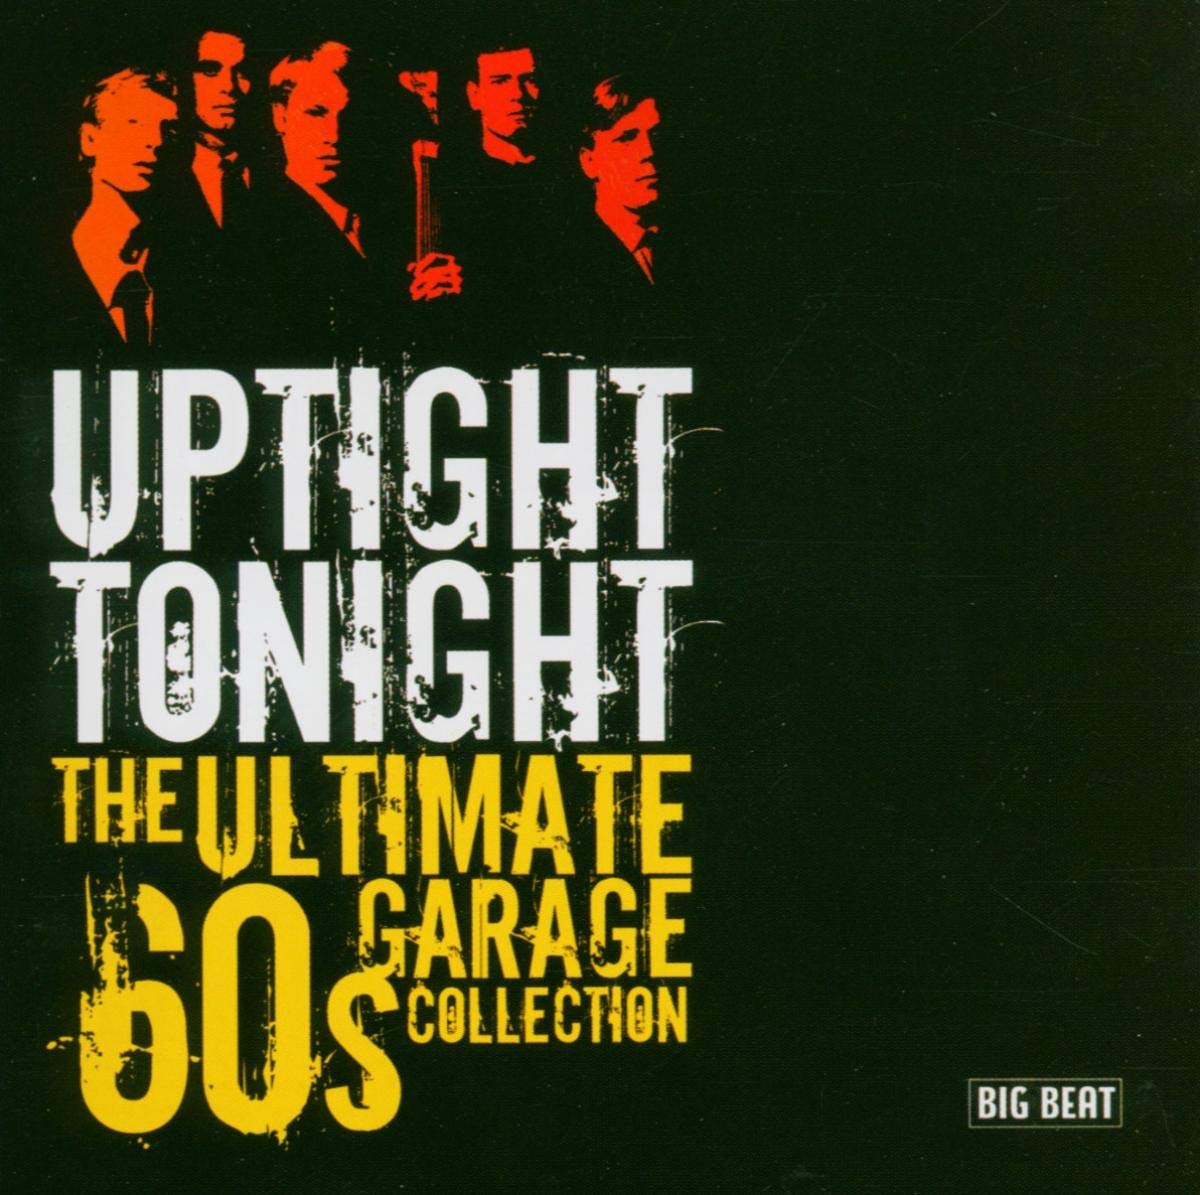 60 Ultimate collection. Uptight. 60 Garage Rock. Uptight перевод. Collection 2005